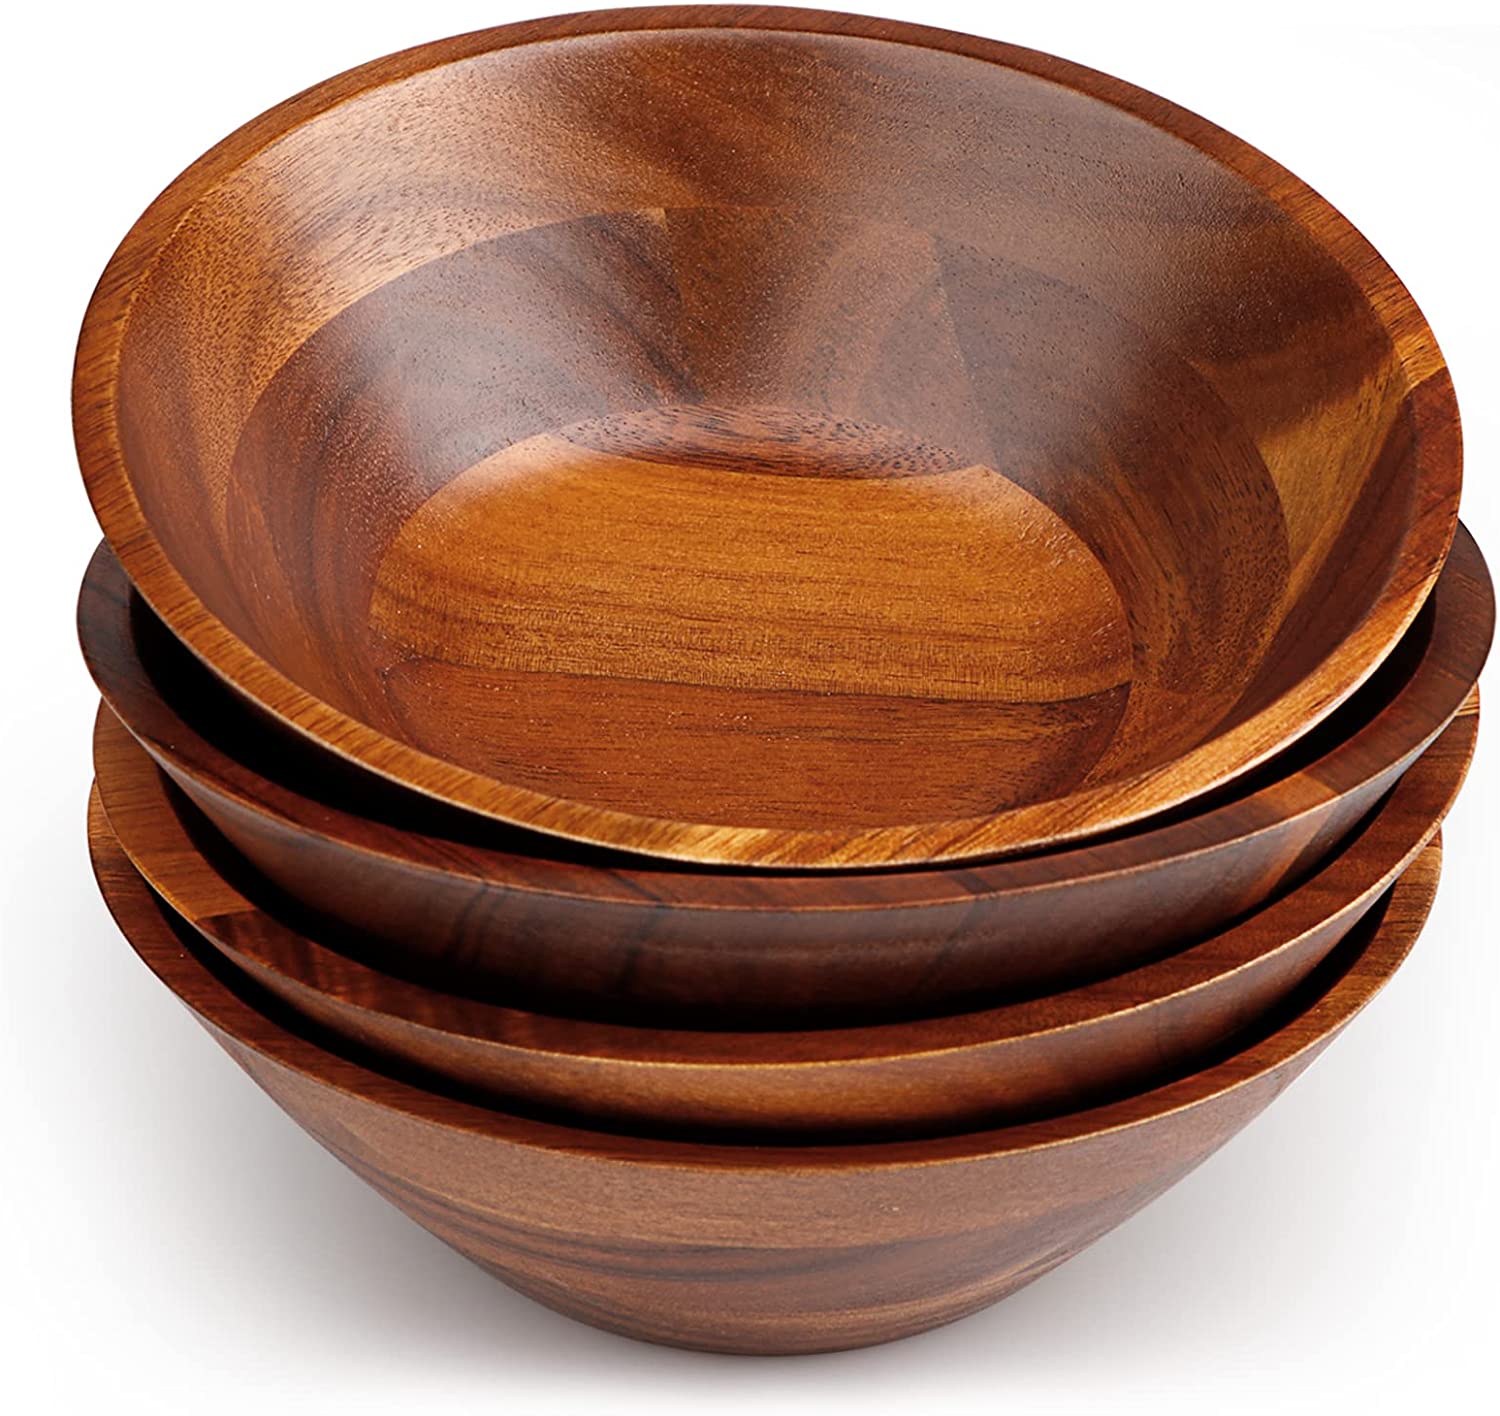 Wooden Salad Bowls Set of 4 Pieces,7” Salad Bowl,Light and Durable Serving Bowl for Containing Salads